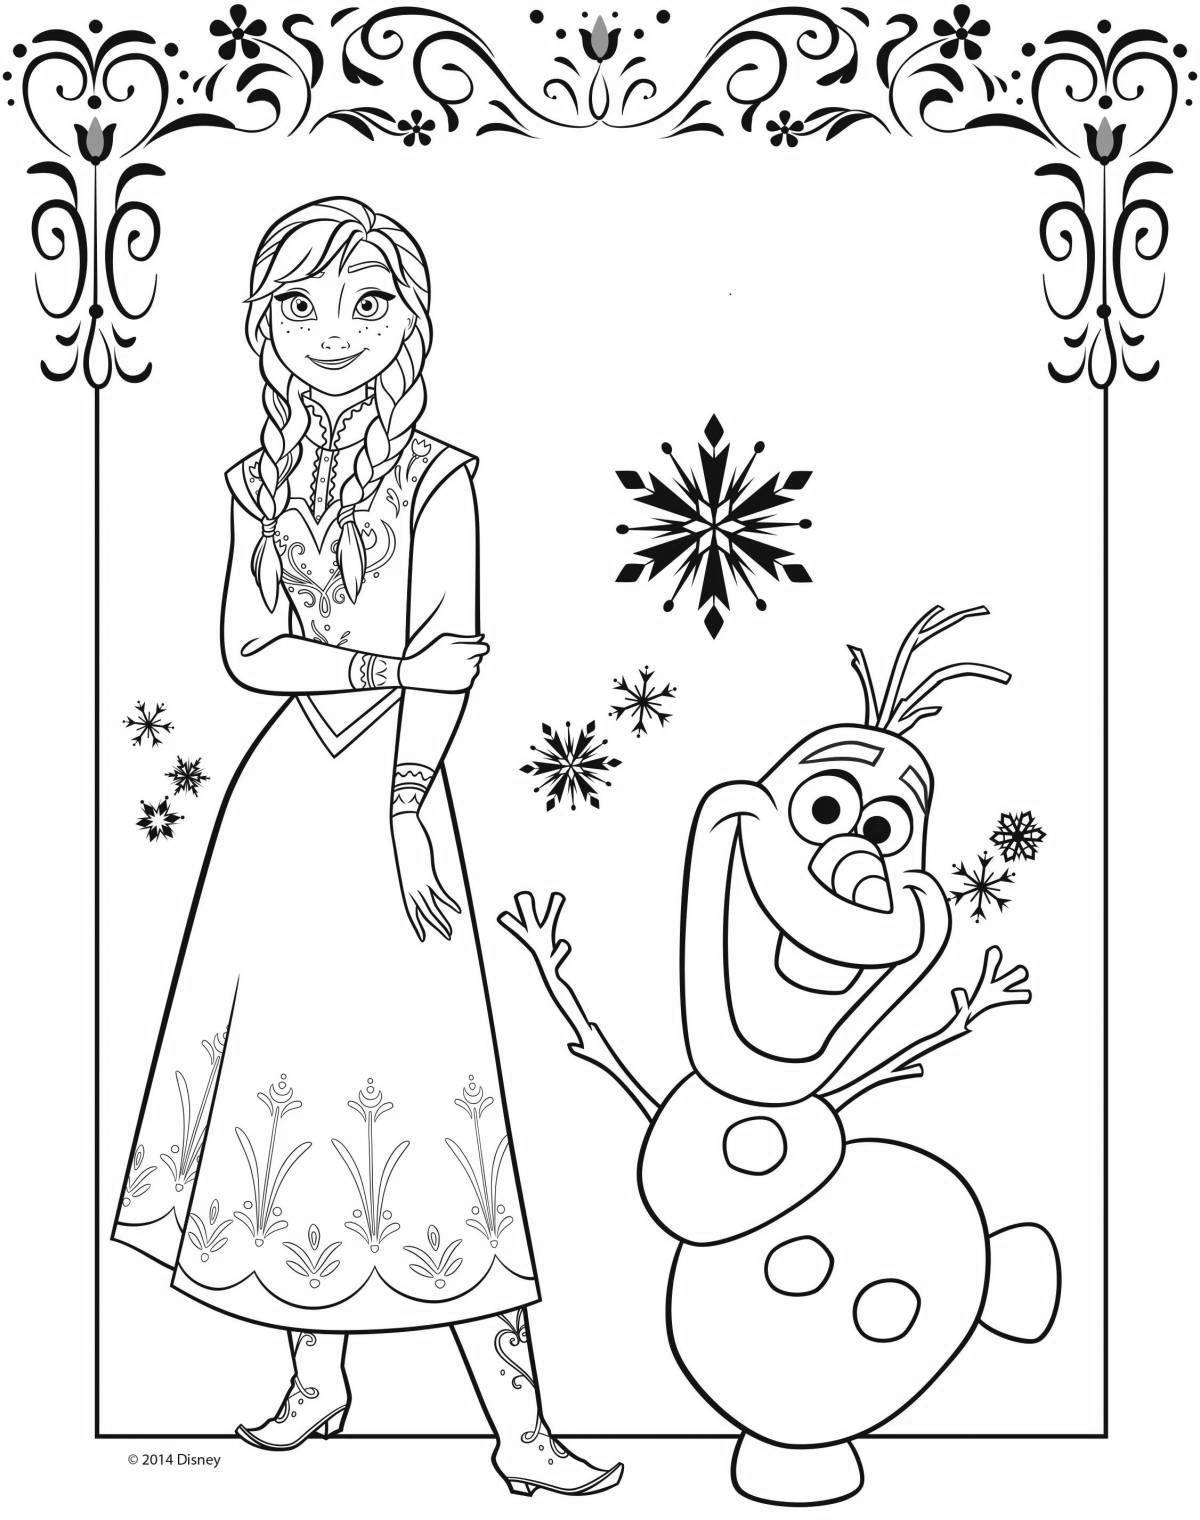 Coloring funny anna and olaf